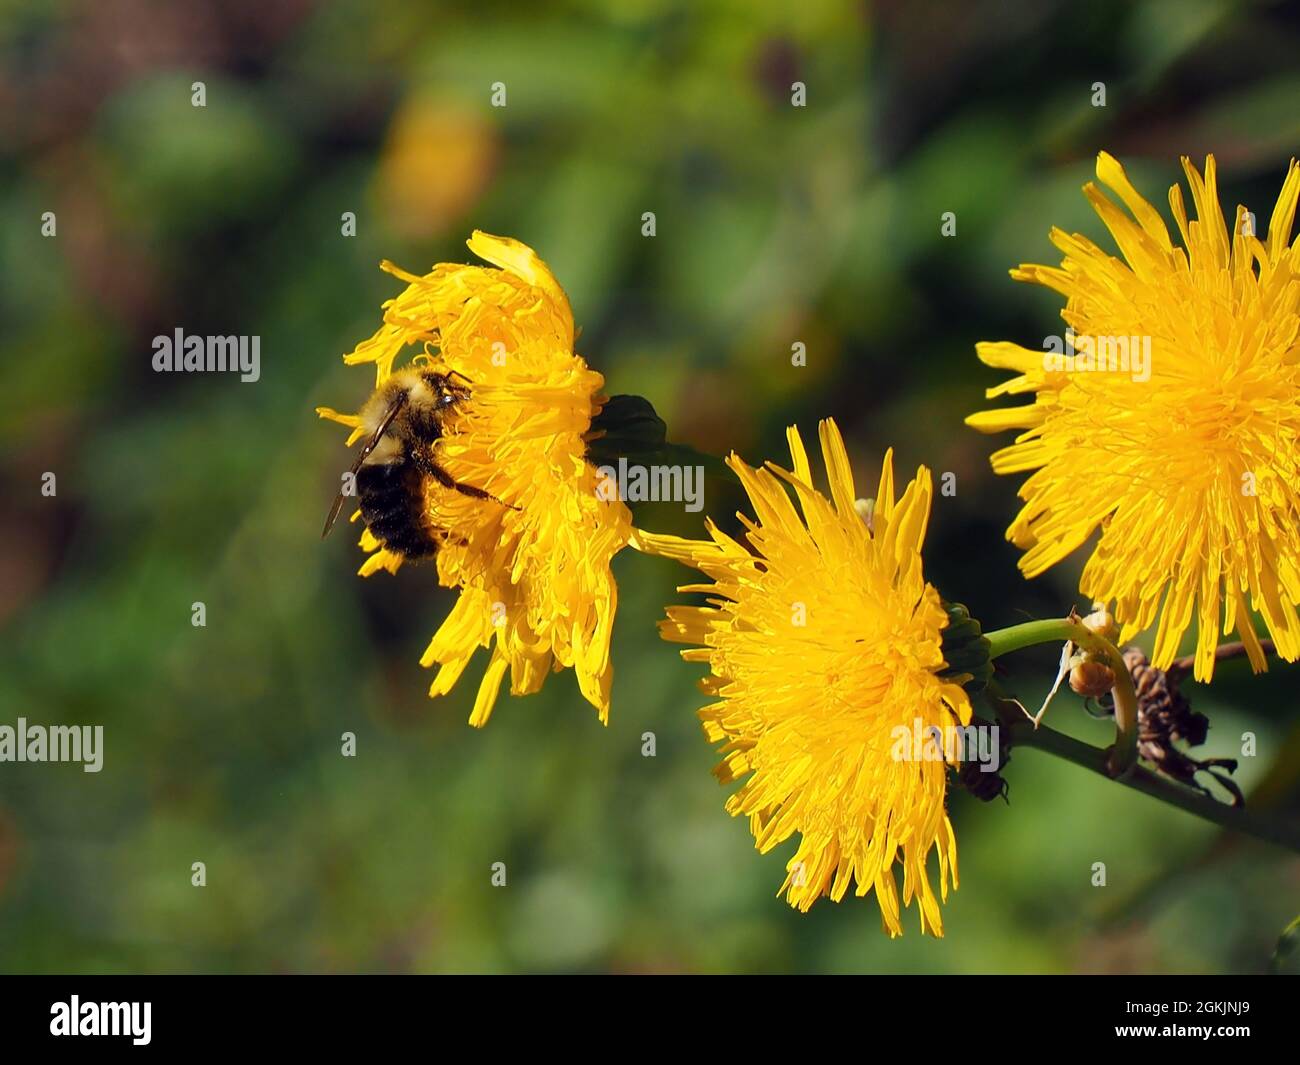 OLYMPUS DIGITAL CAMERA - Close-up of a bumblebee collecting nectar from the yellow flower on a sow-thistle plant growing in a meadow. Stock Photo